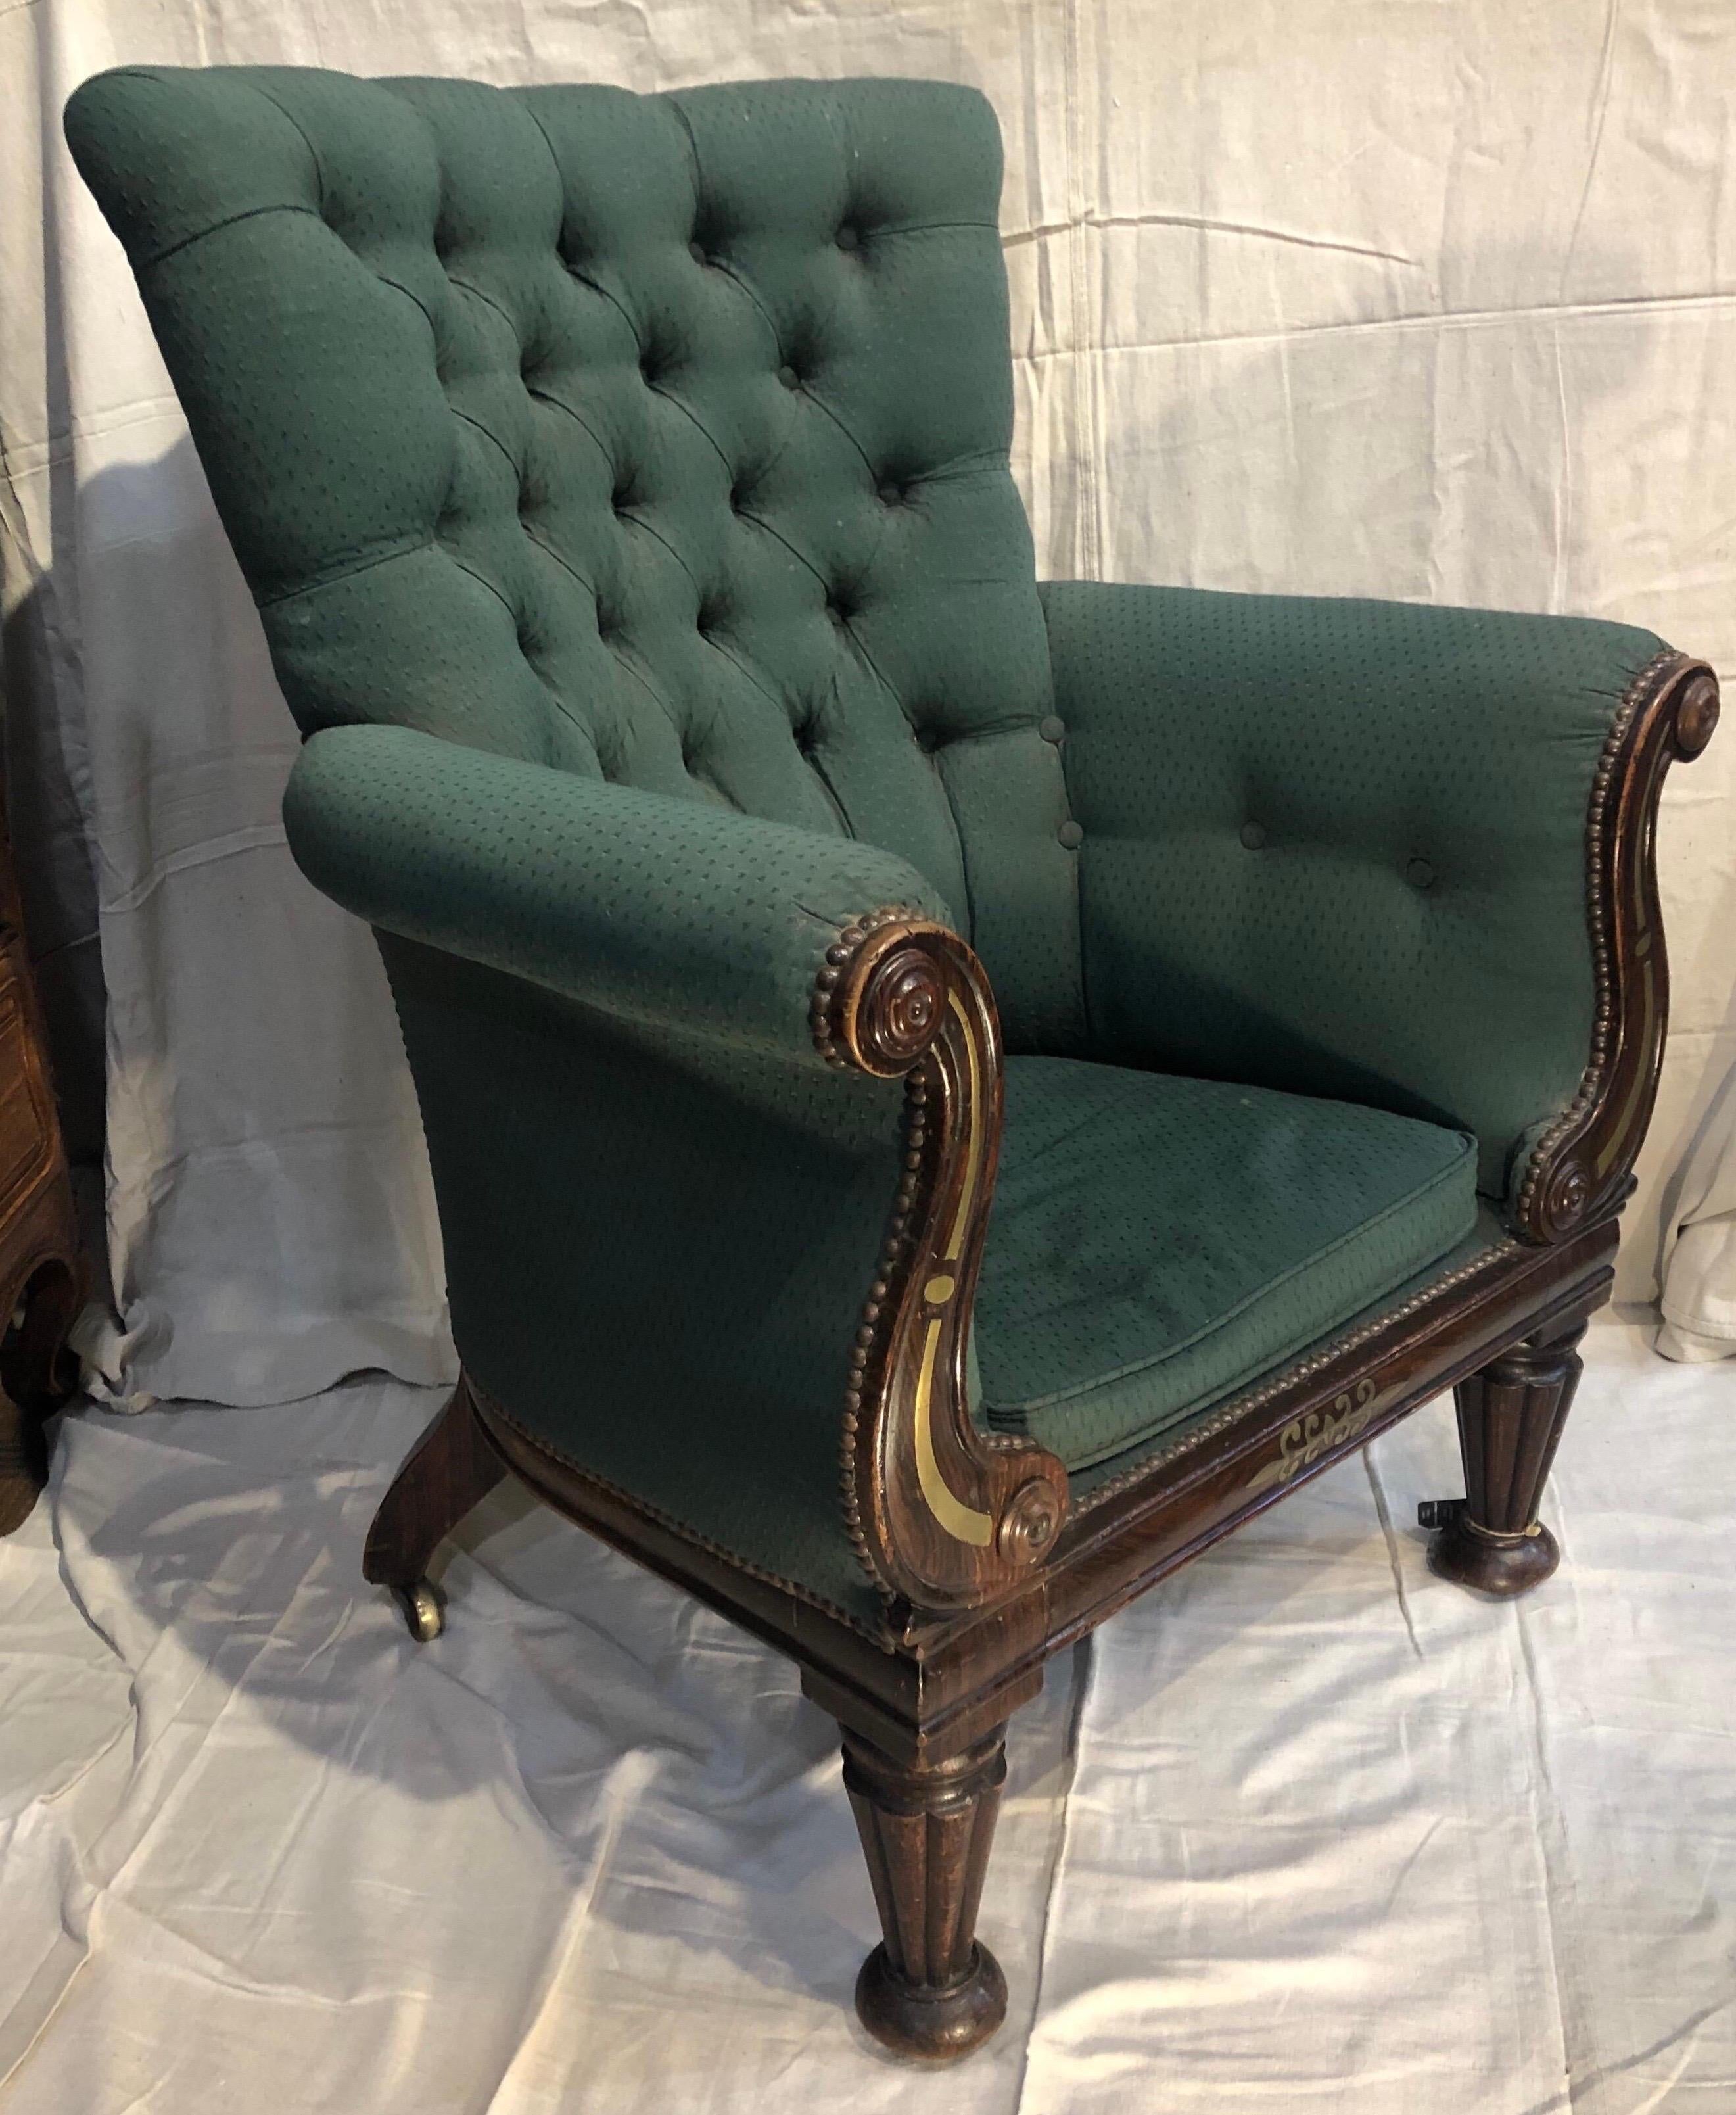 19th century regency library chair with brass inlay and faux rosewood grain. Original castors.